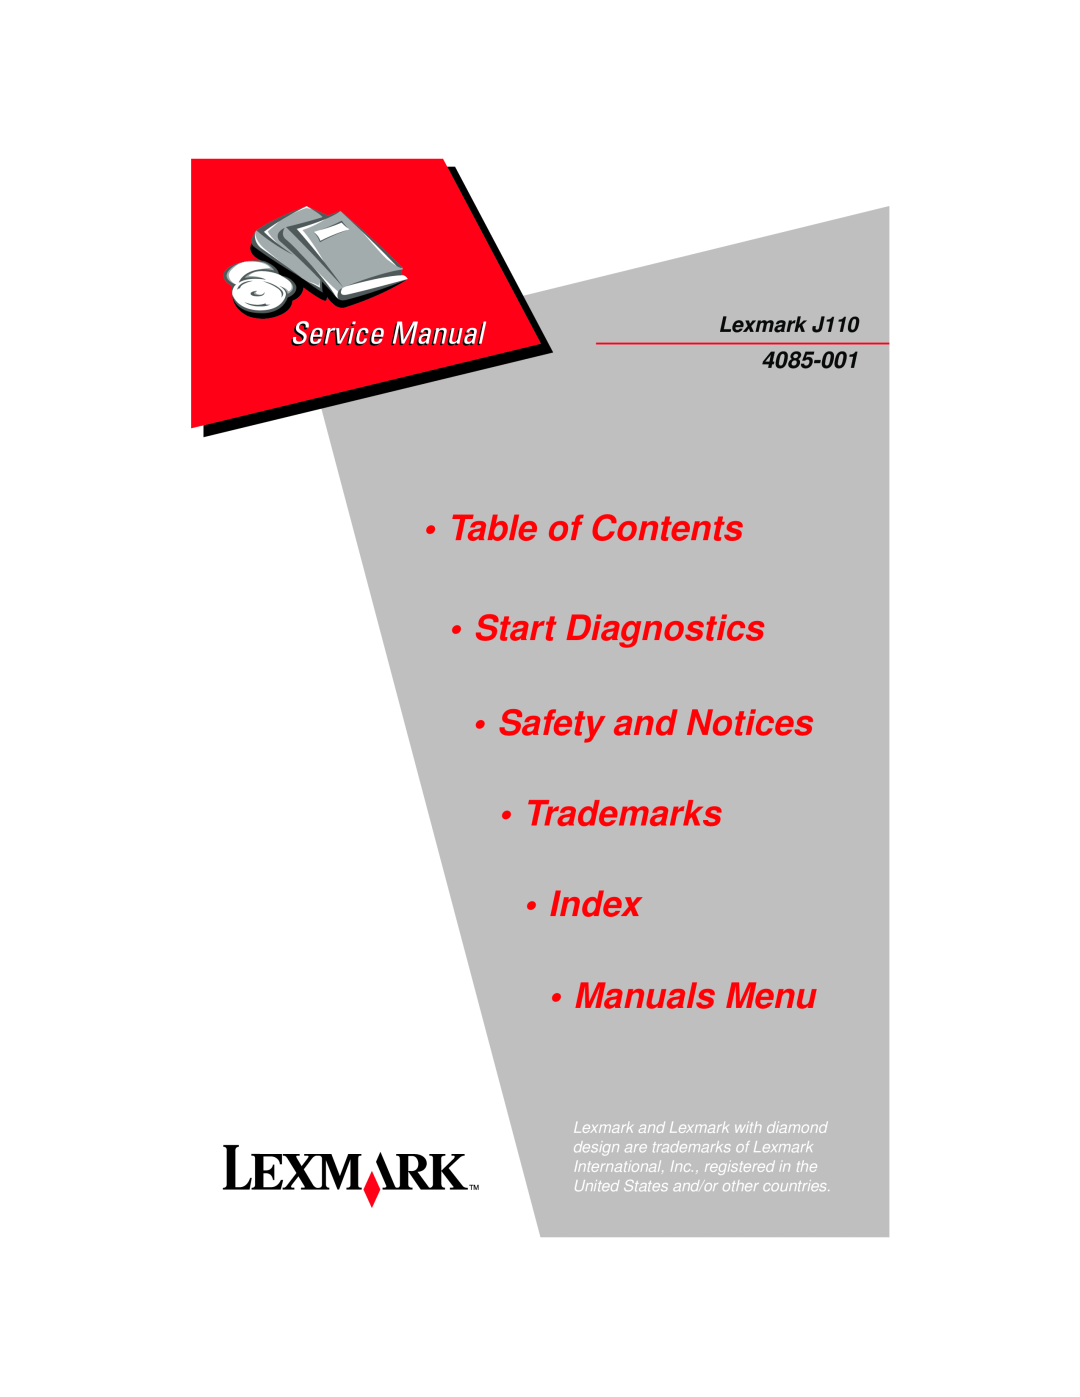 Lexmark Printer manual •Table of Contents •Start Diagnostics, •Safety and Notices •Trademarks • Index, • Manuals Menu 